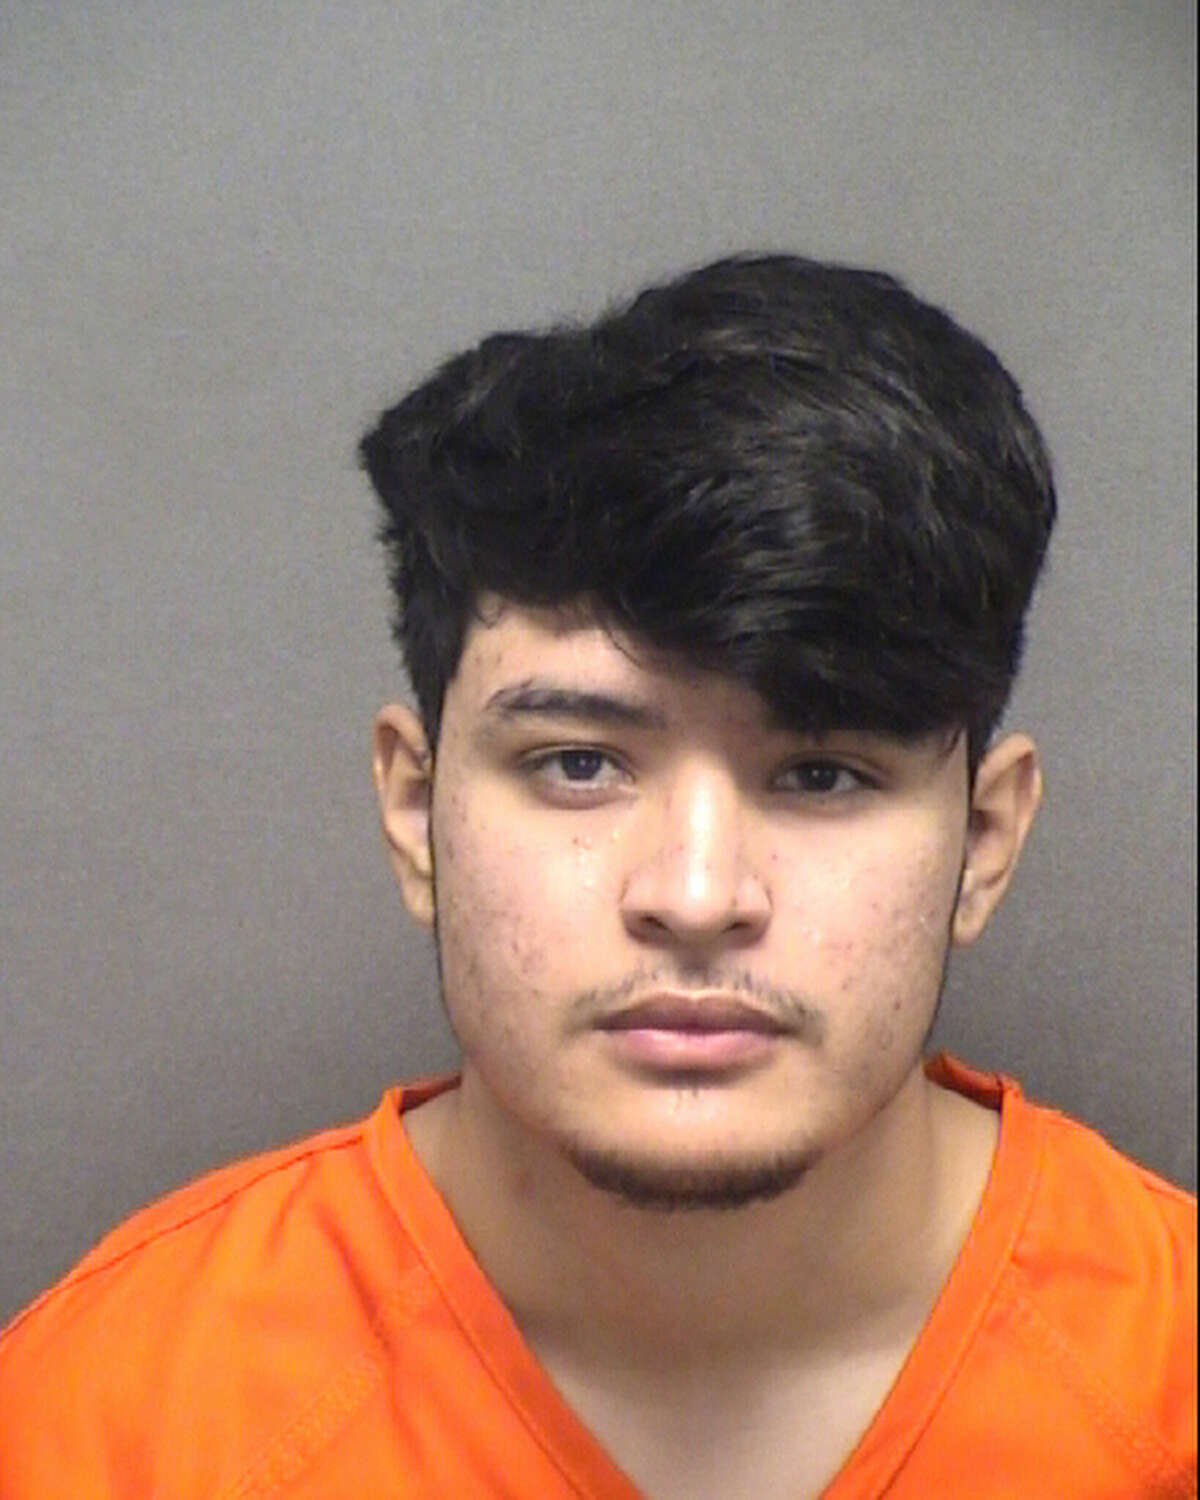 Bexar County Sheriff's Department cadet Ricardo Gutierrez, seen in a Bexar County jail booking photo provided Jan. 4, 2023, was arrested Jan. 3, 2023 and charged with family assault after he allegedly got into an argument with his girlfriend and choked her, according to a press release.